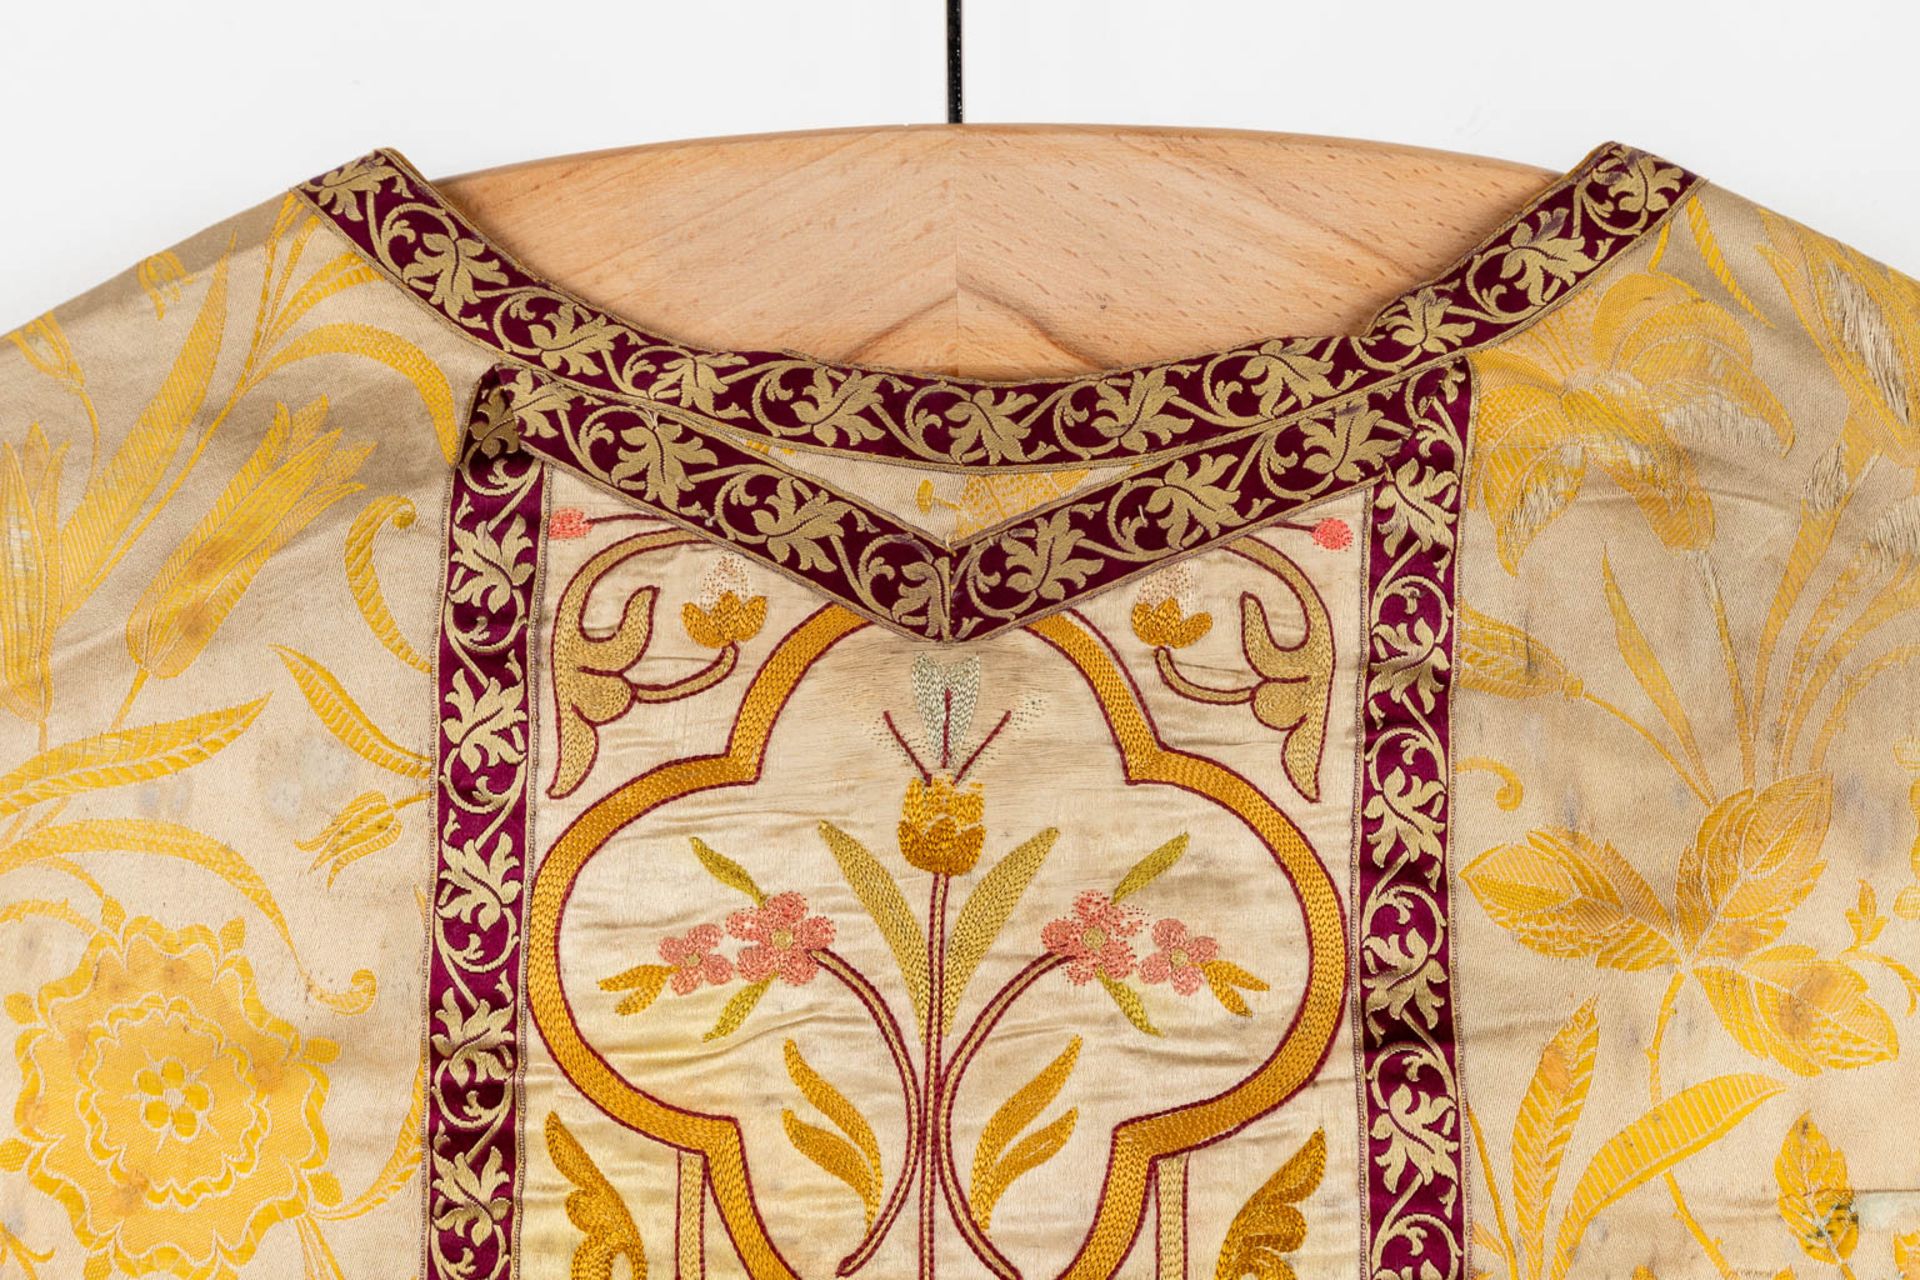 Four Dalmatics, Two Roman Chasubles, A stola and Chalice Veil, finished with embroideries. - Image 13 of 59